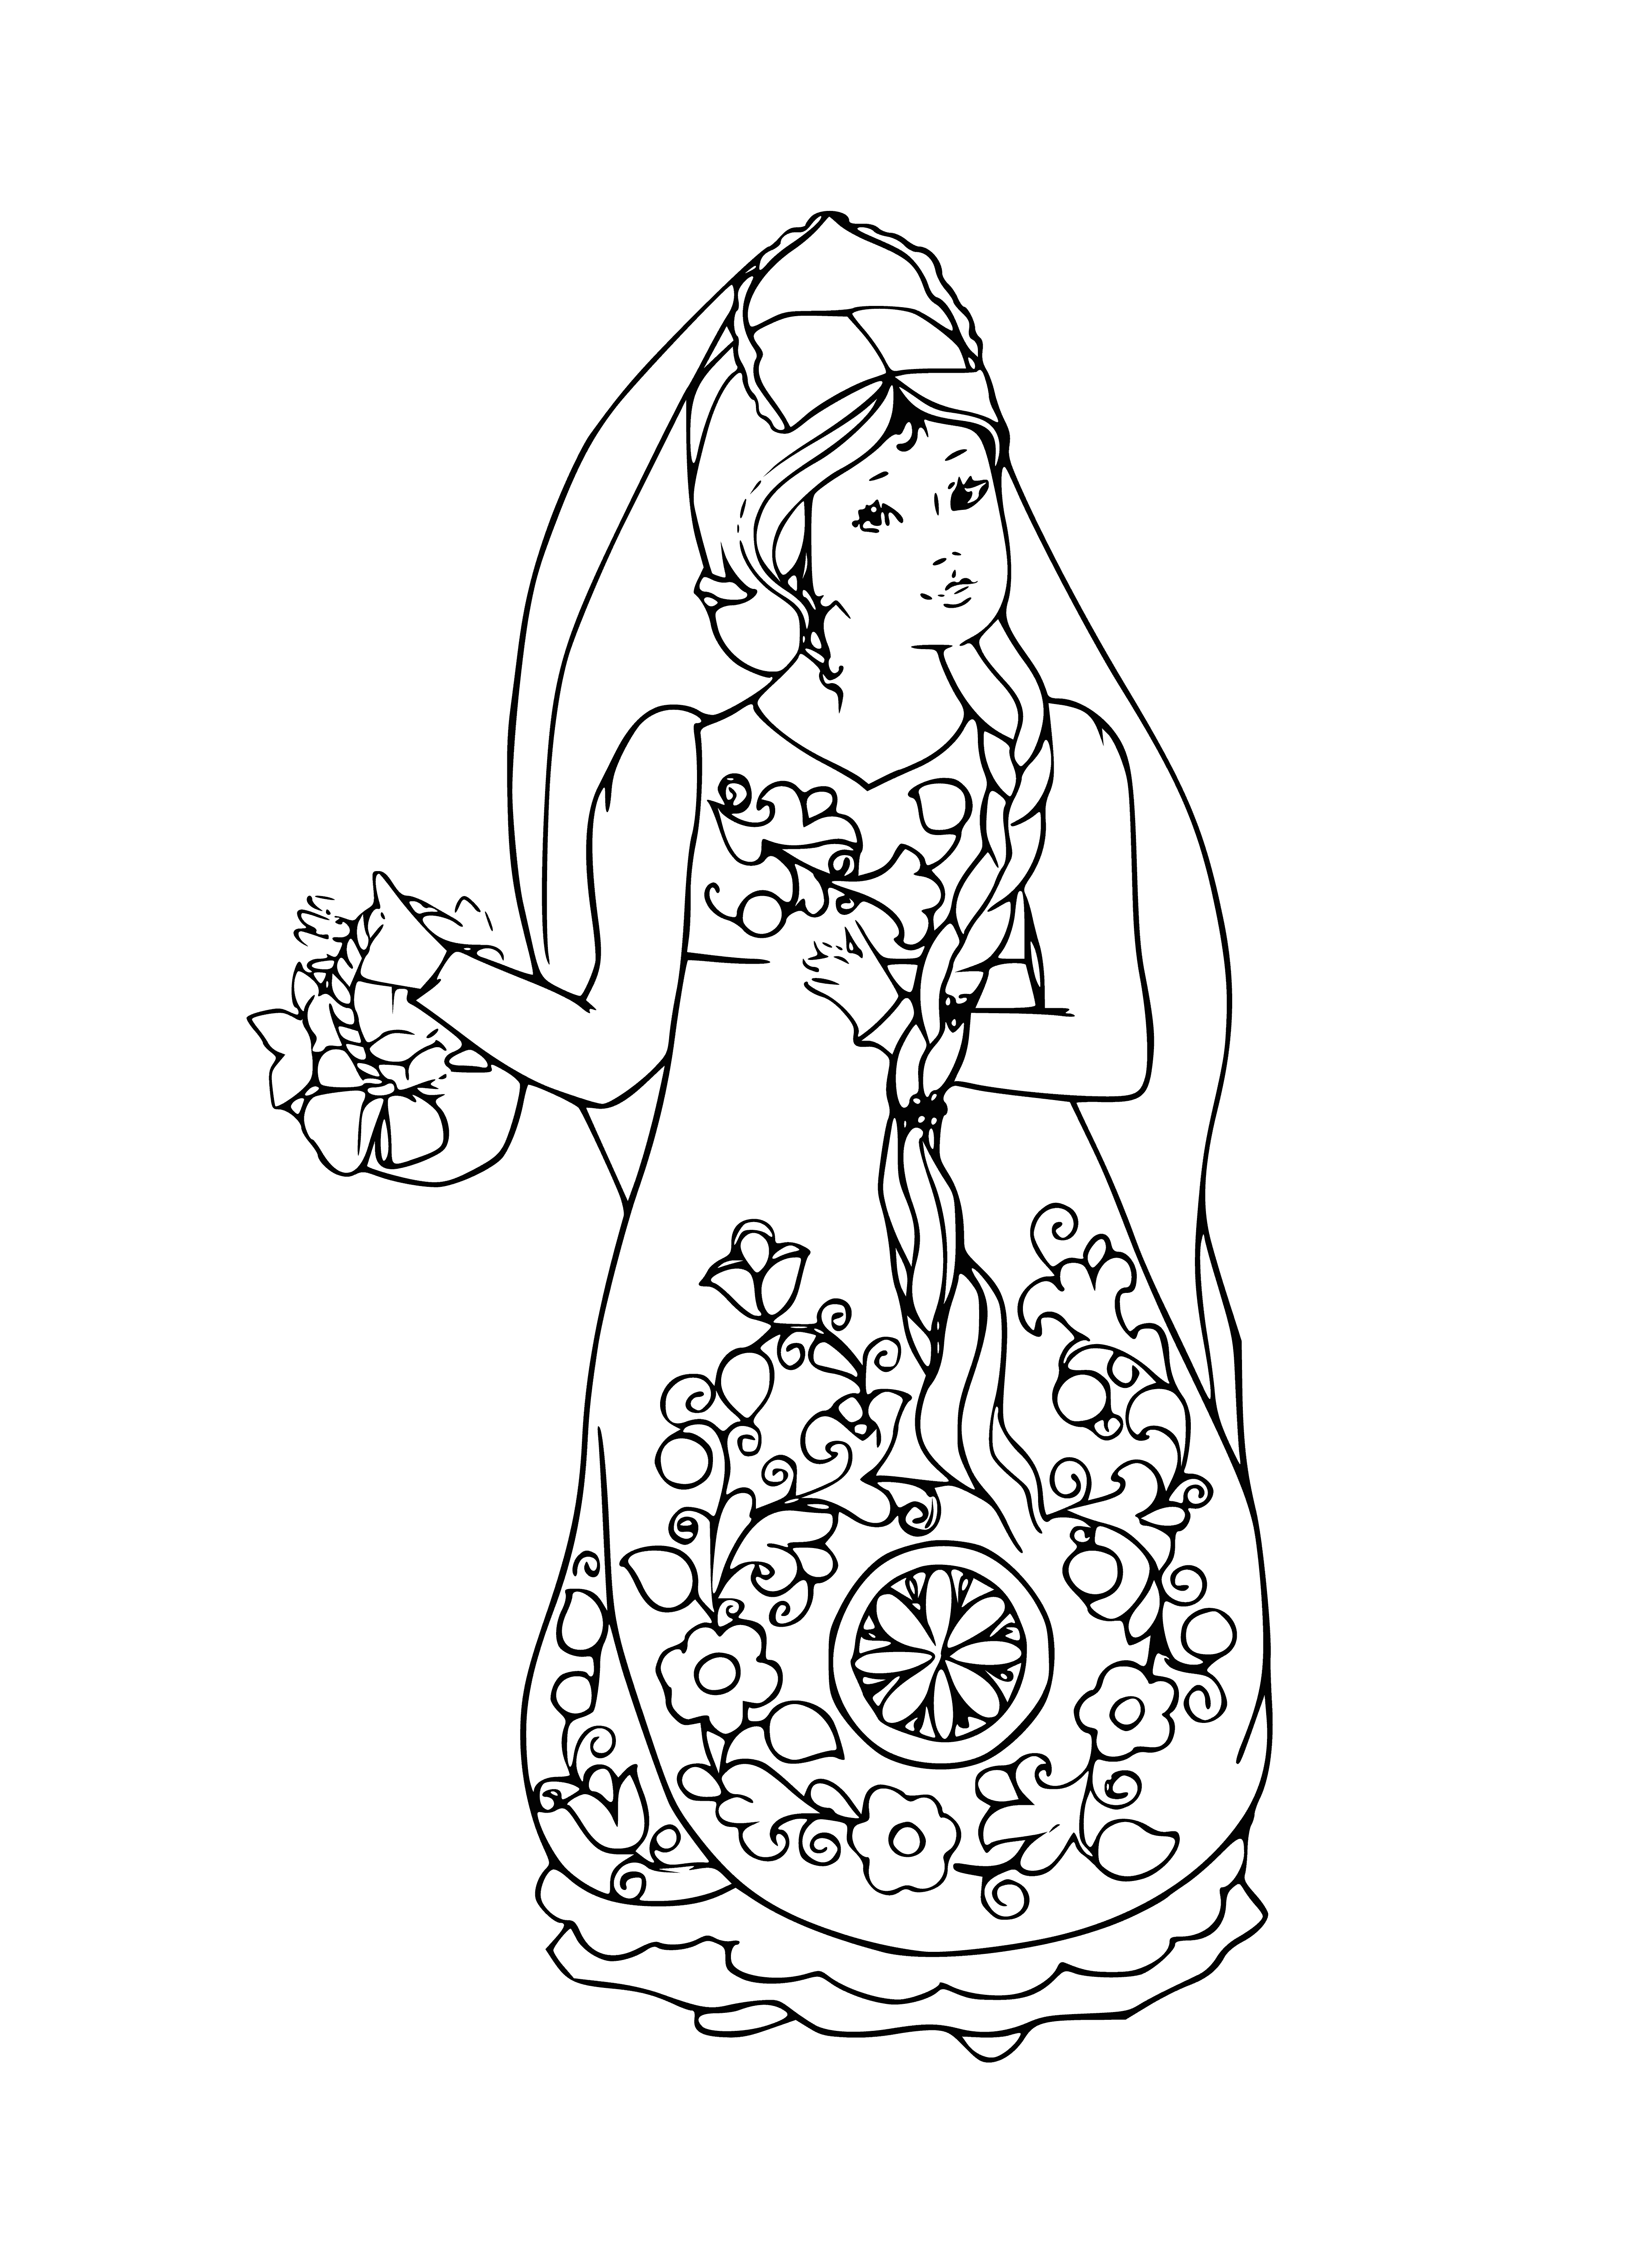 coloring page: Woman with blonde hair, wearing white dress & blue scarf, smiles gently in a field full of flowers.